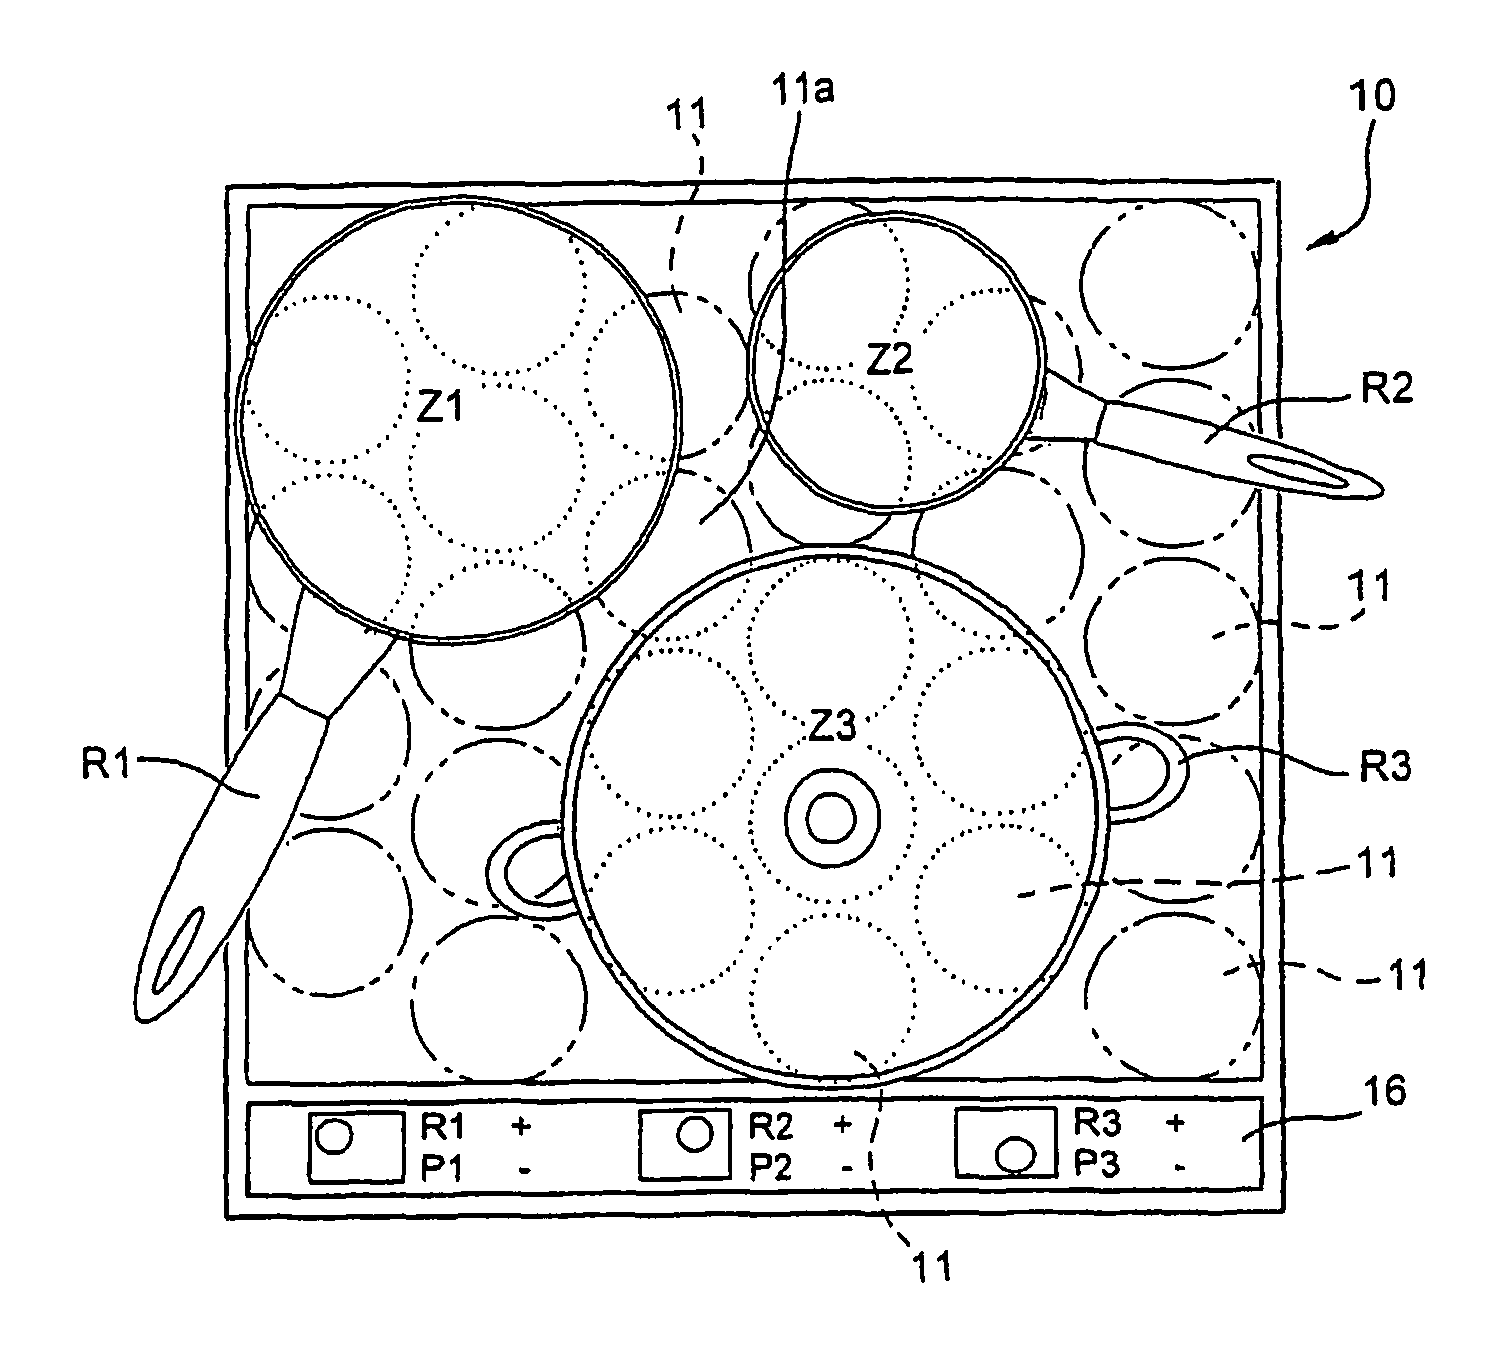 Method for heating a container placed on a cooktop by heating means associated to inductors